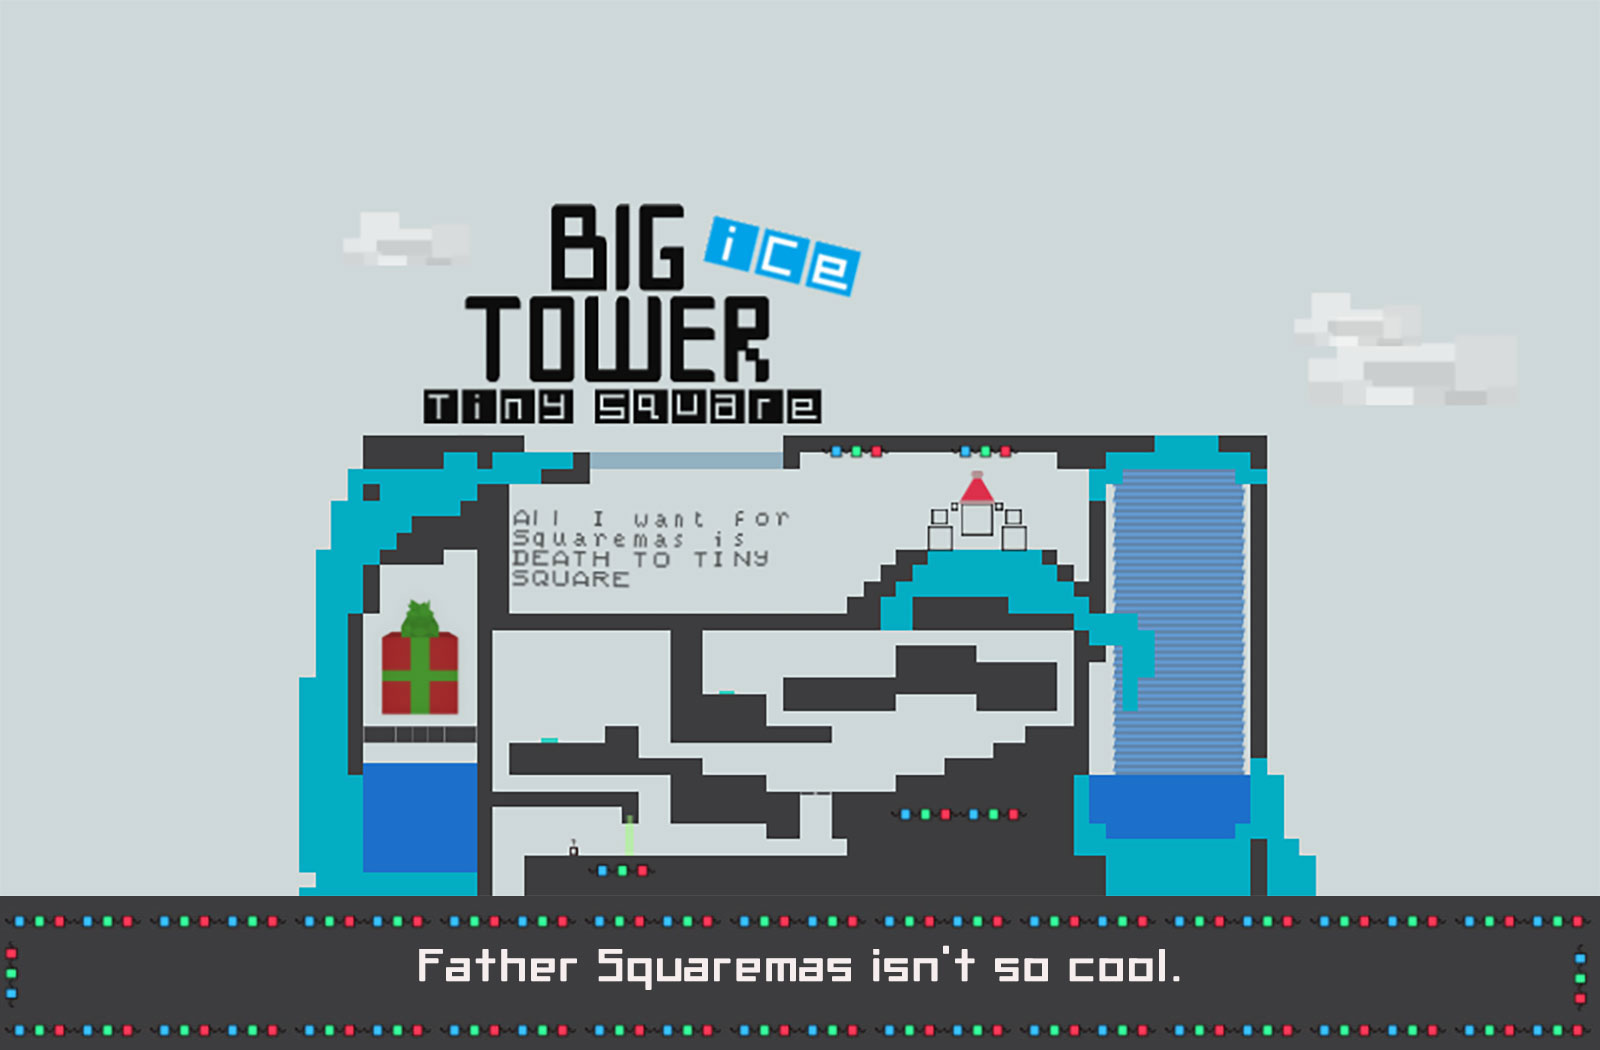 How long is Big ICE Tower Tiny Square?